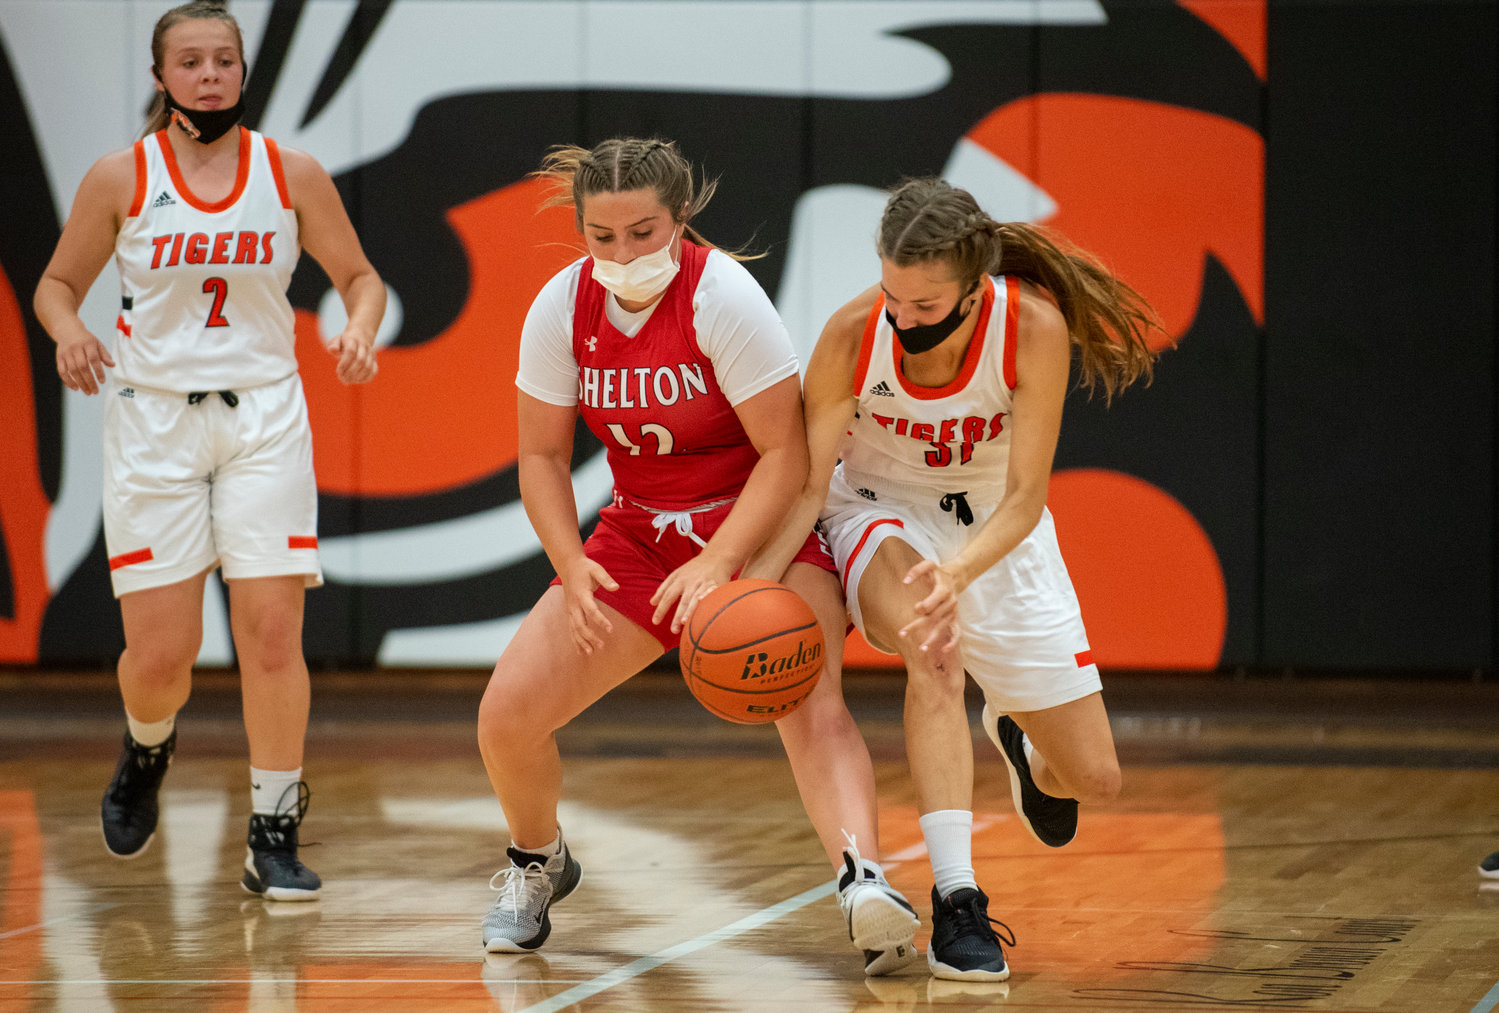 Centralia's Maddie Corwin, right, battles for a loose ball with a Shelton player.